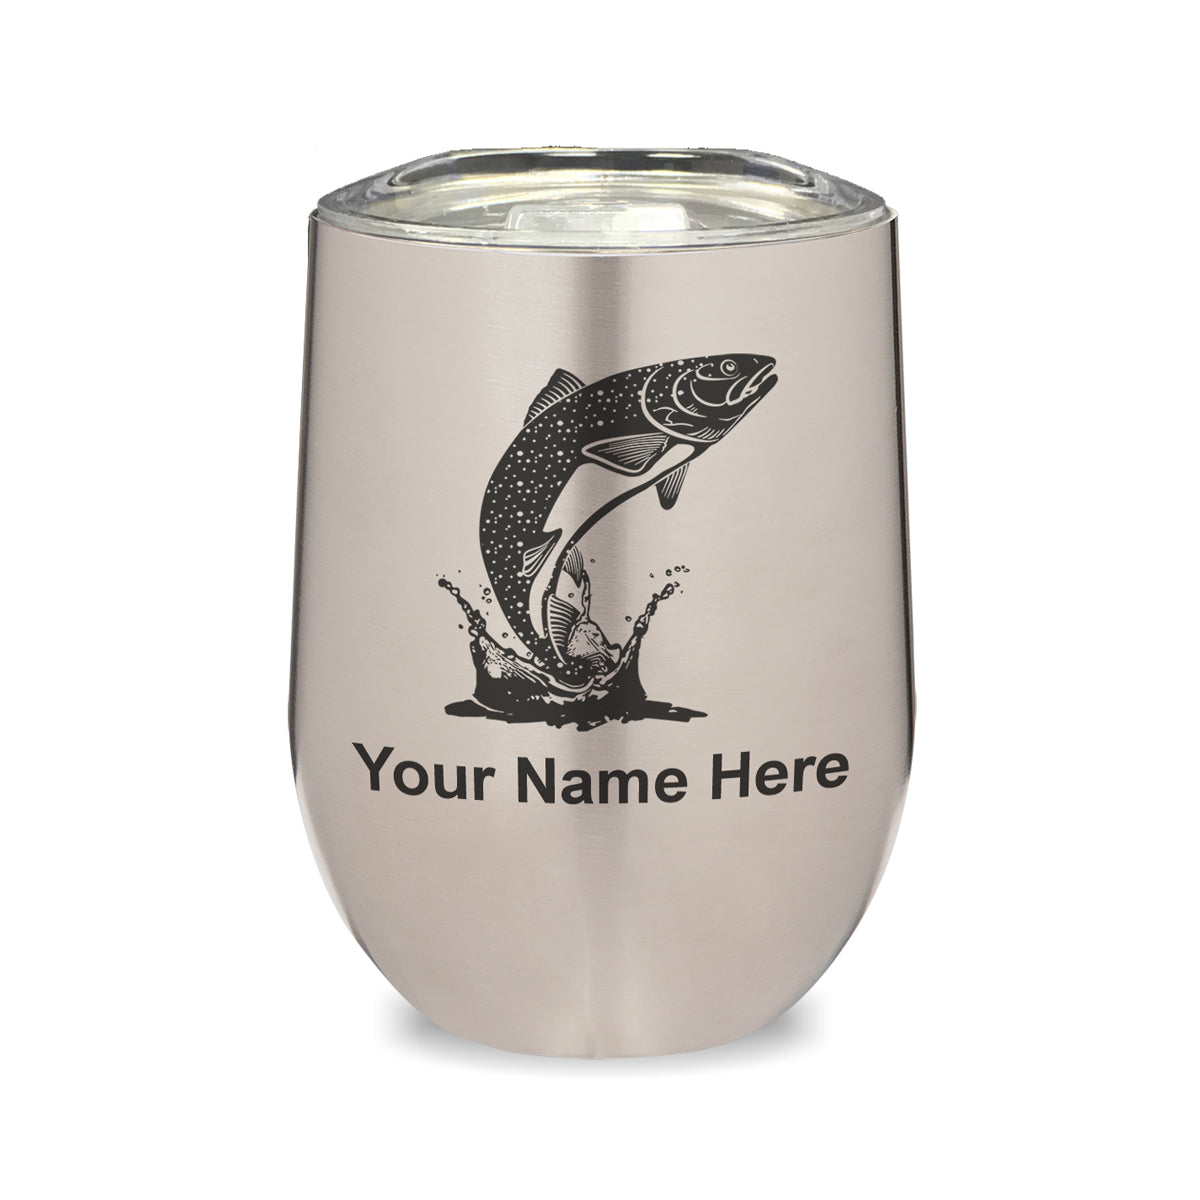 LaserGram Double Wall Stainless Steel Wine Glass, Trout Fish, Personalized Engraving Included